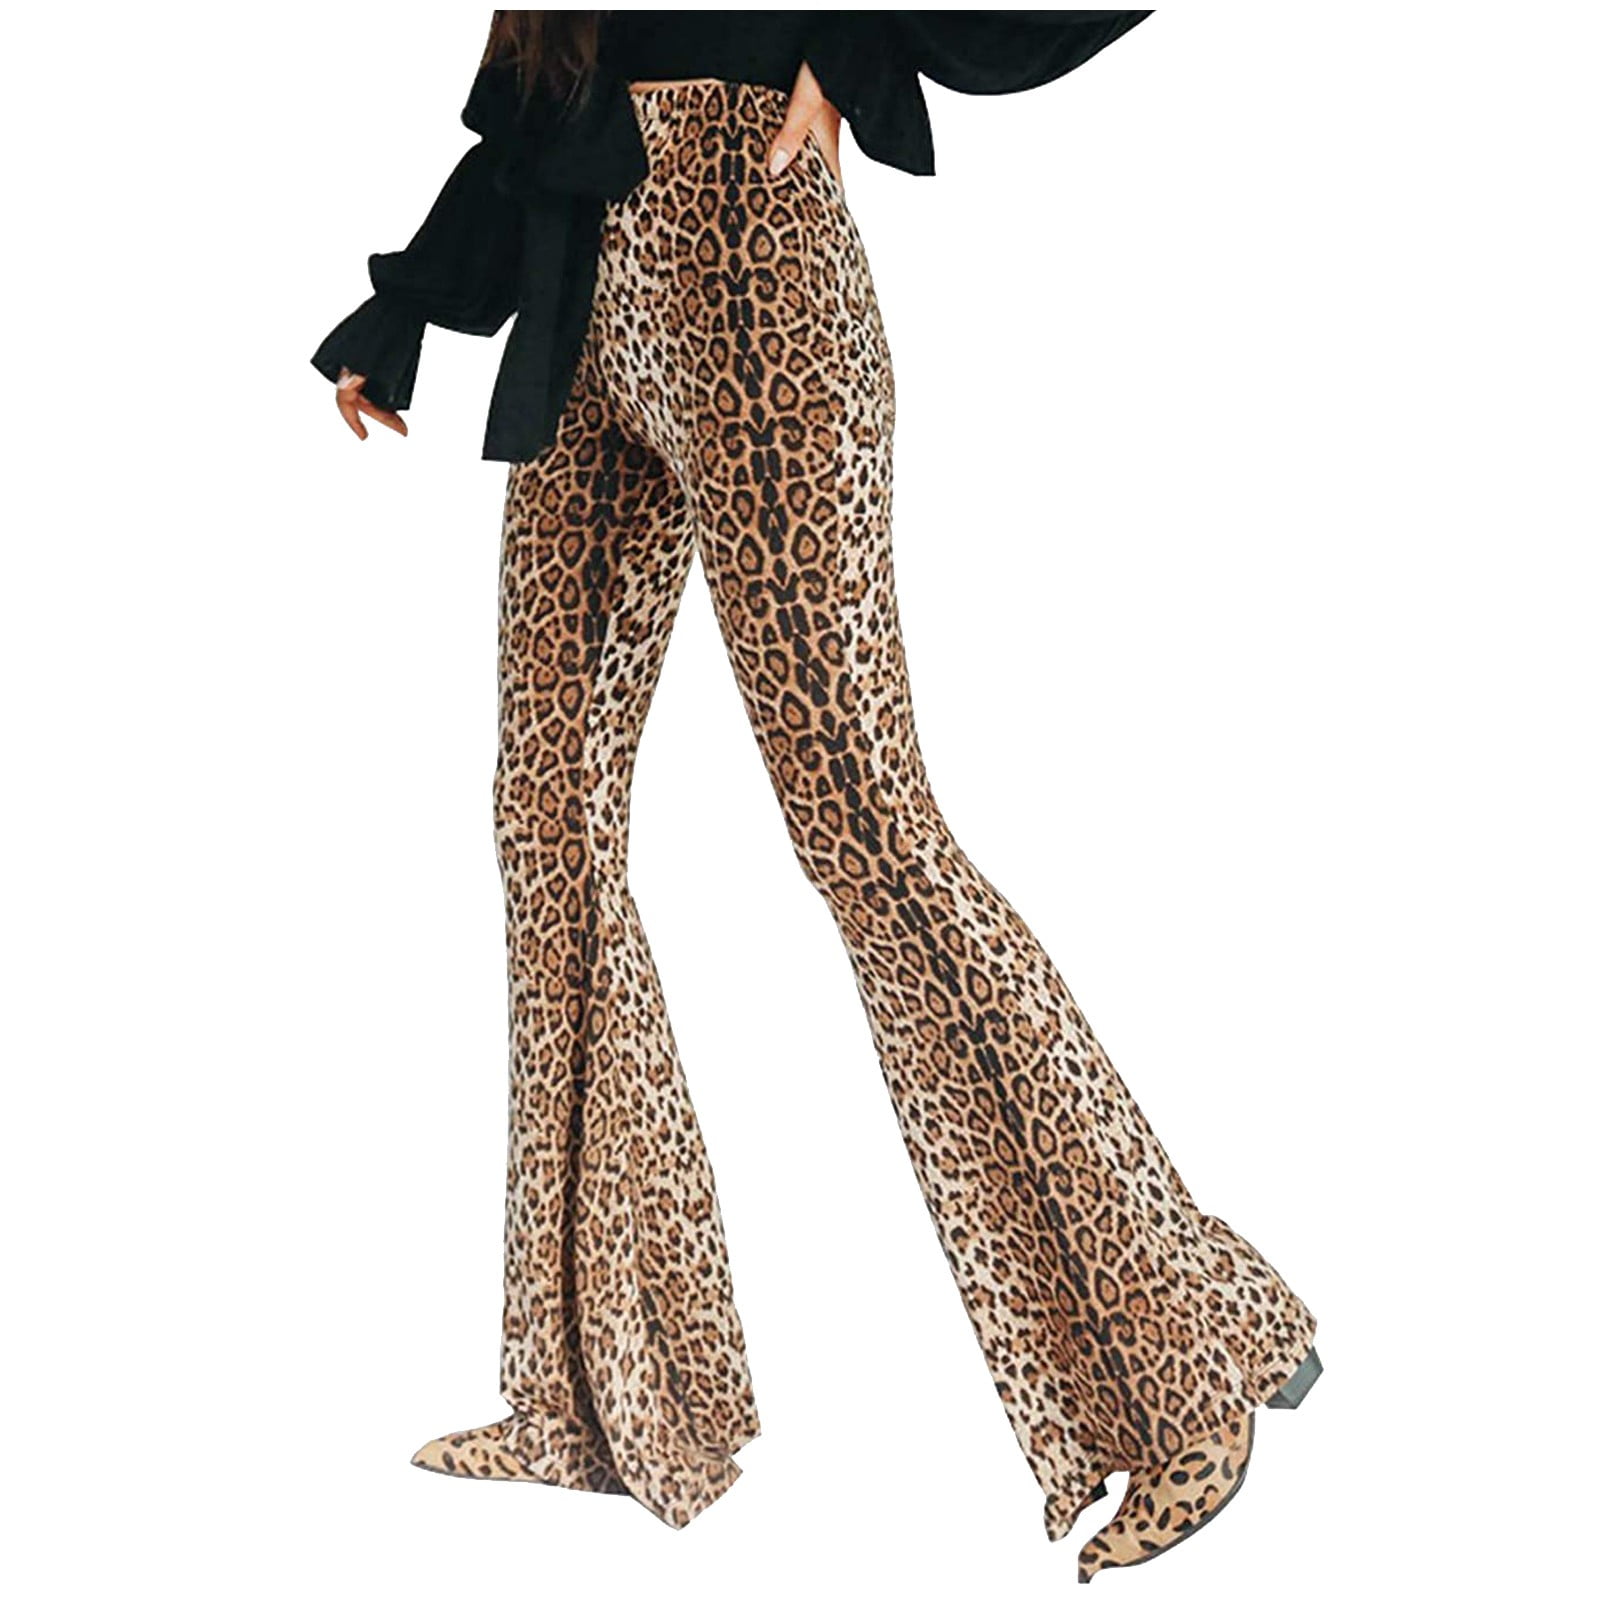 Dyegold Stretchy Flare Leggings for Women Vintage Leopard Print Wide Leg  Bootcut High Waisted Yoga Pants Boho Stretchy Casual Trouser 